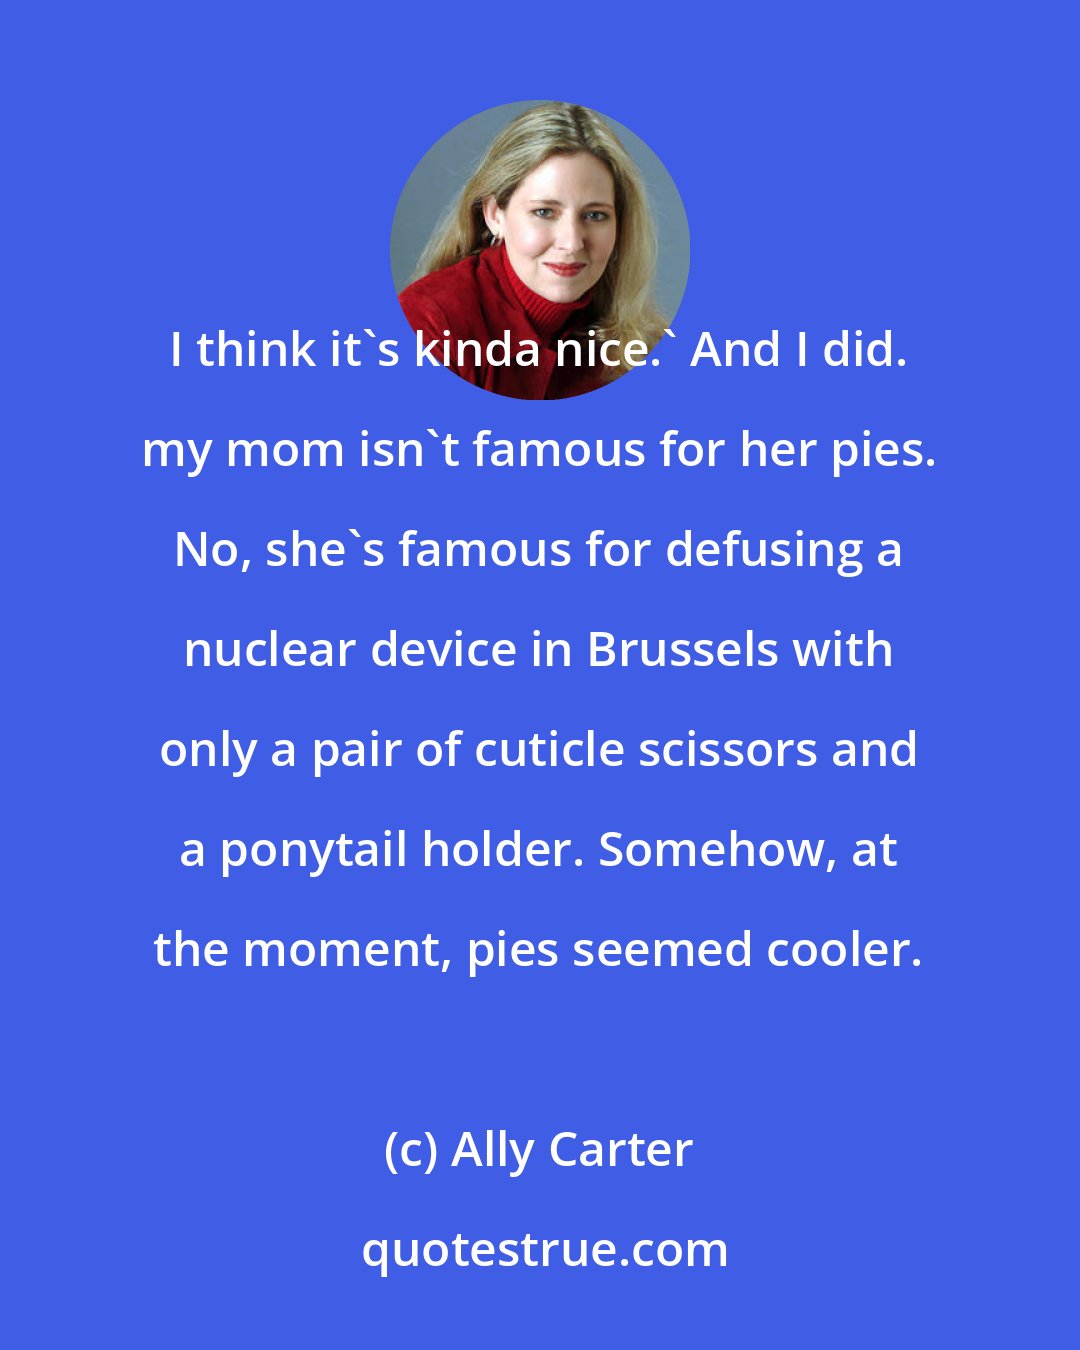 Ally Carter: I think it's kinda nice.' And I did. my mom isn't famous for her pies. No, she's famous for defusing a nuclear device in Brussels with only a pair of cuticle scissors and a ponytail holder. Somehow, at the moment, pies seemed cooler.